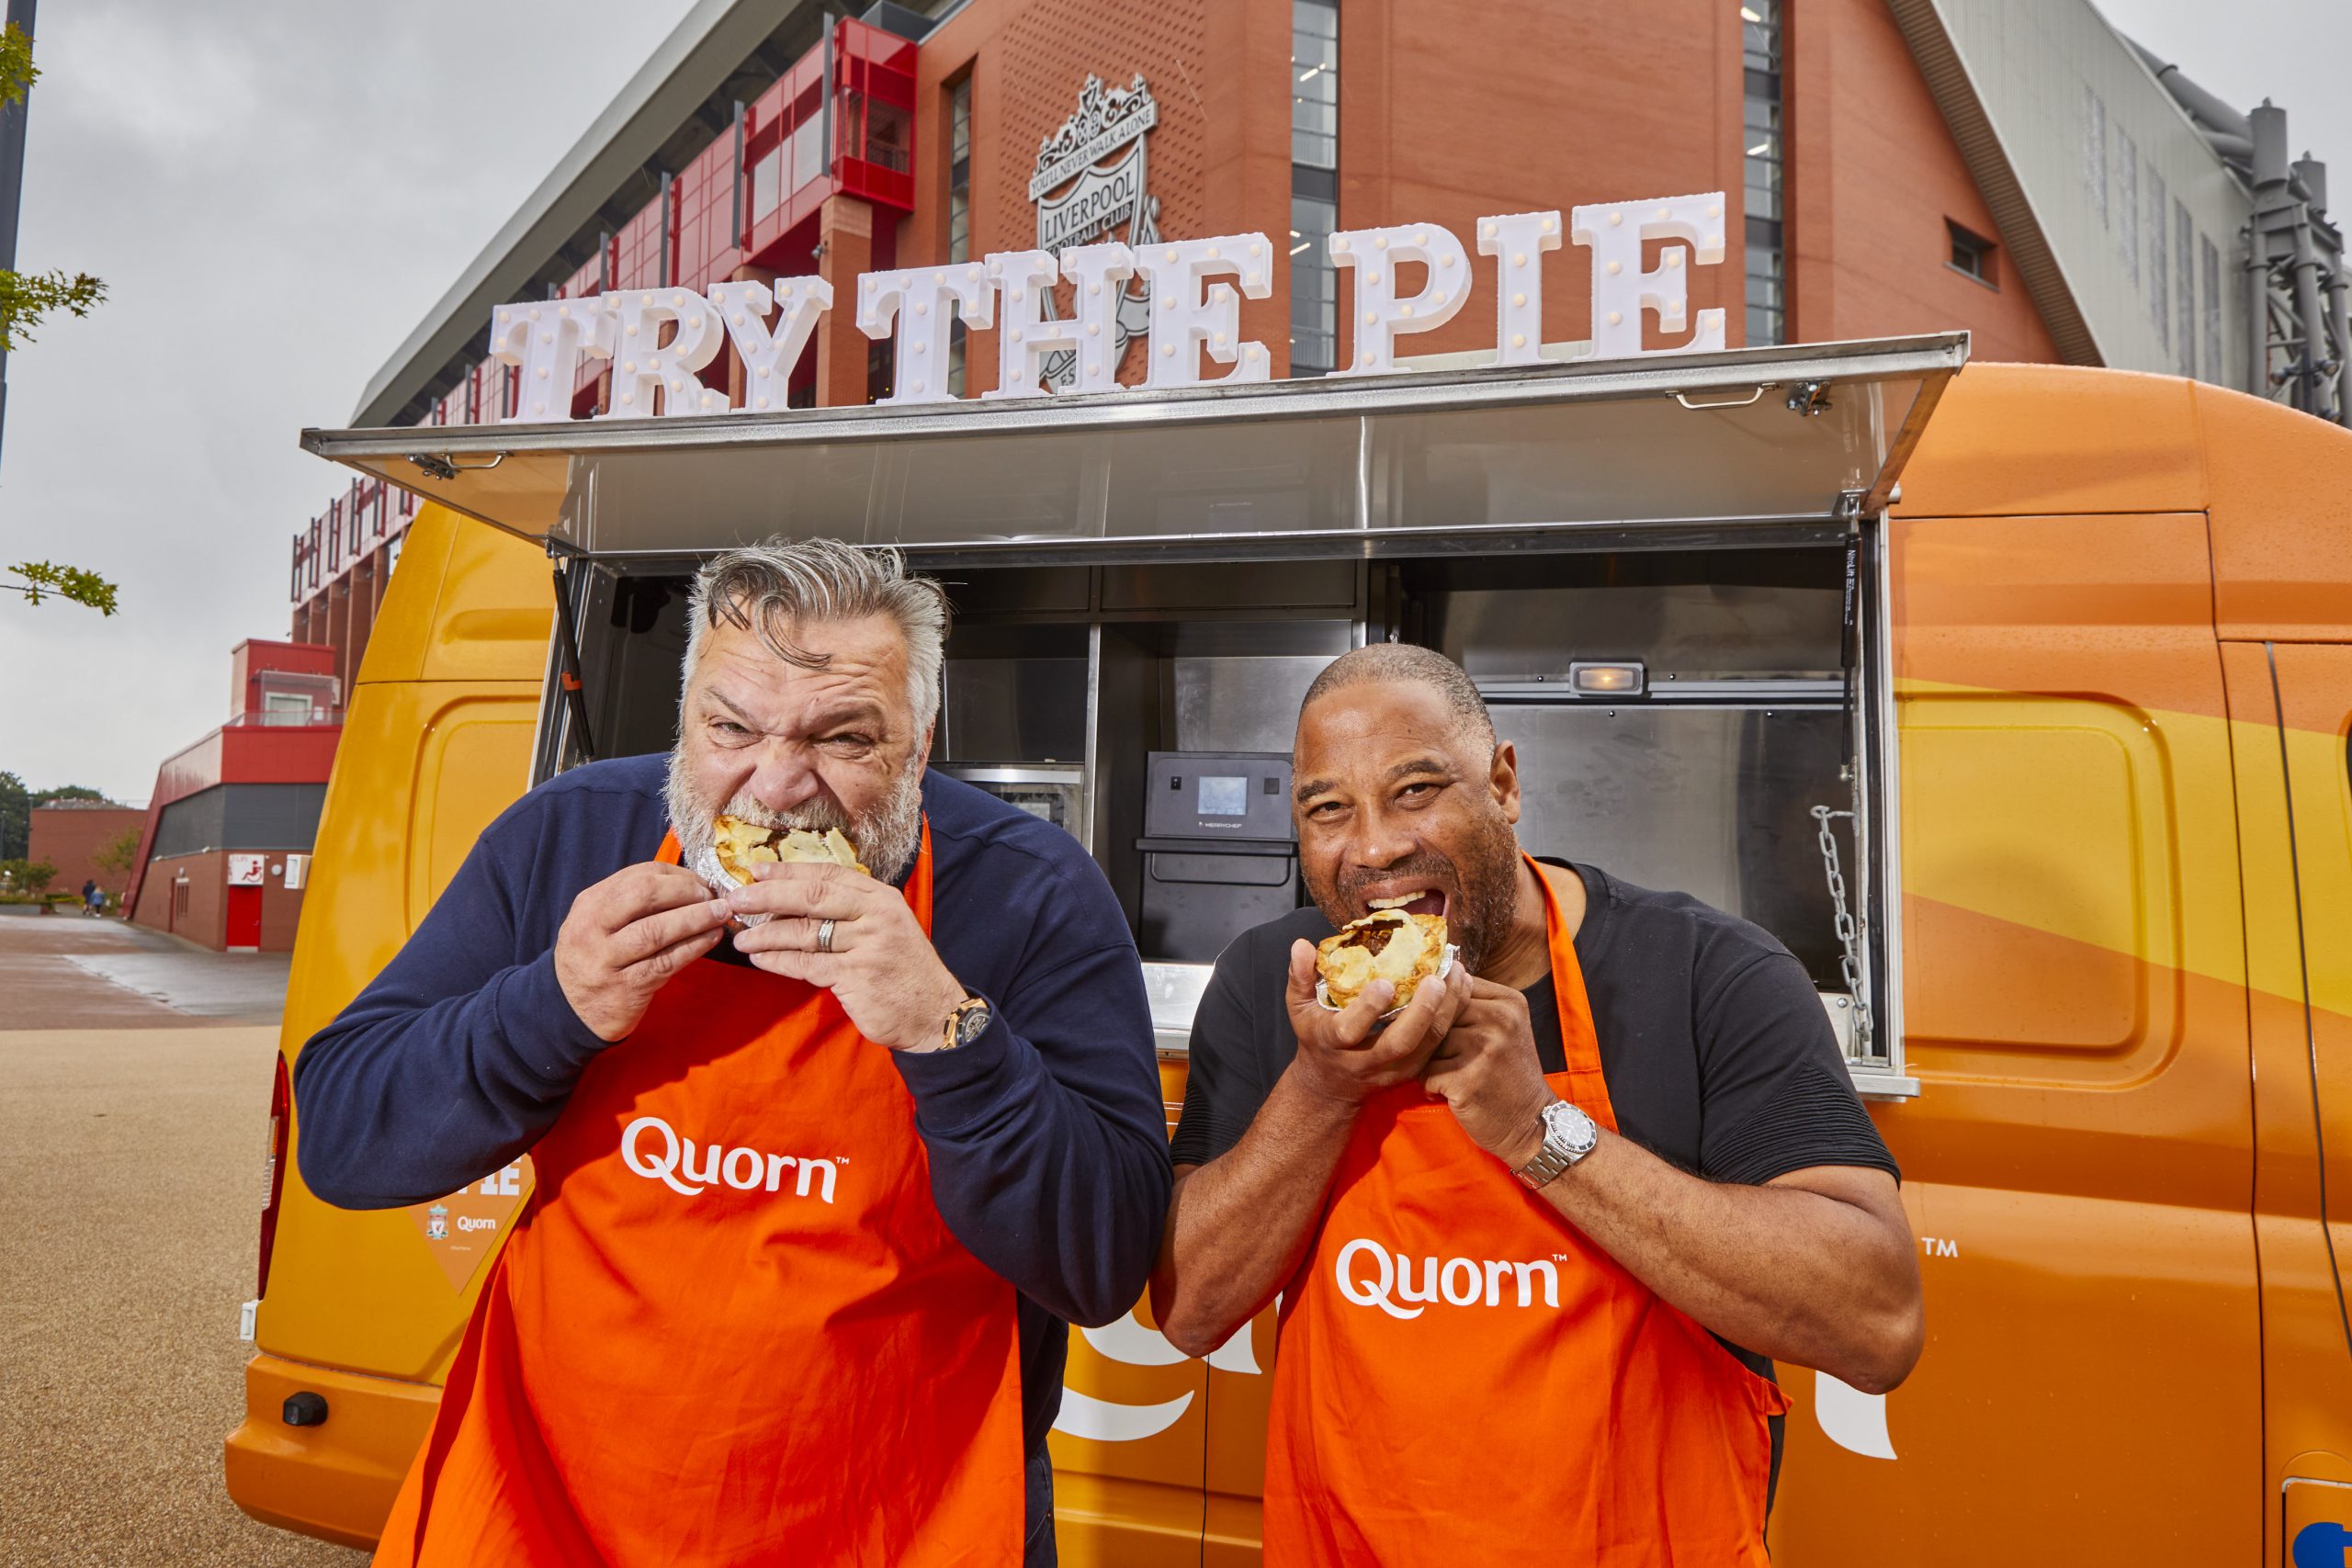 Quorn and LFC launch new ‘Meat Free Match Day’ pie at Anfield